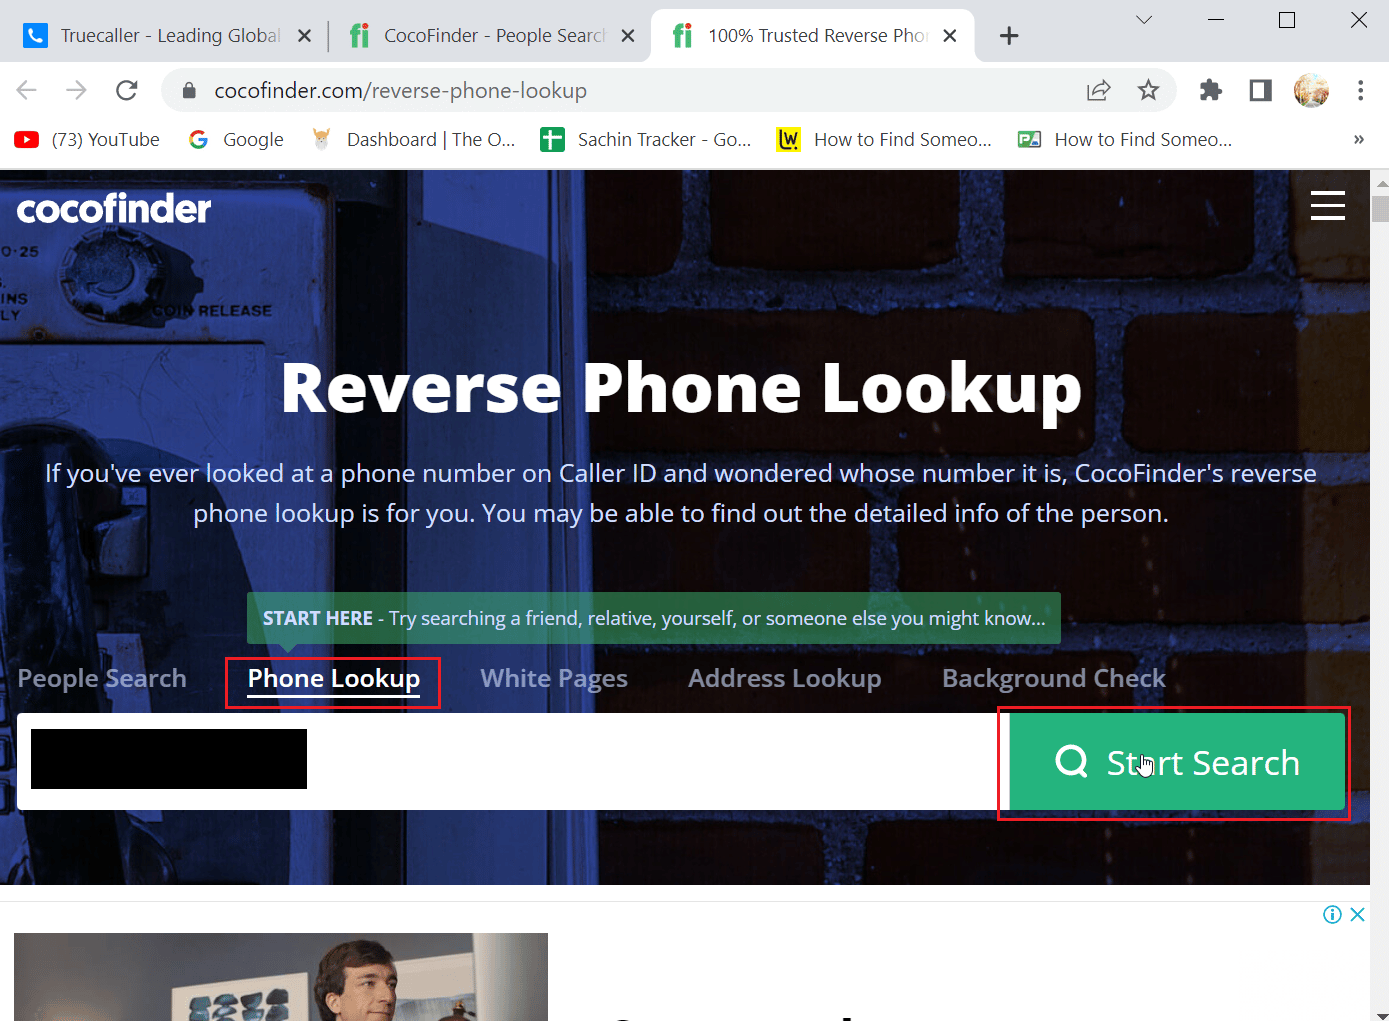 click on phone lookup and enter the phone number and click on search